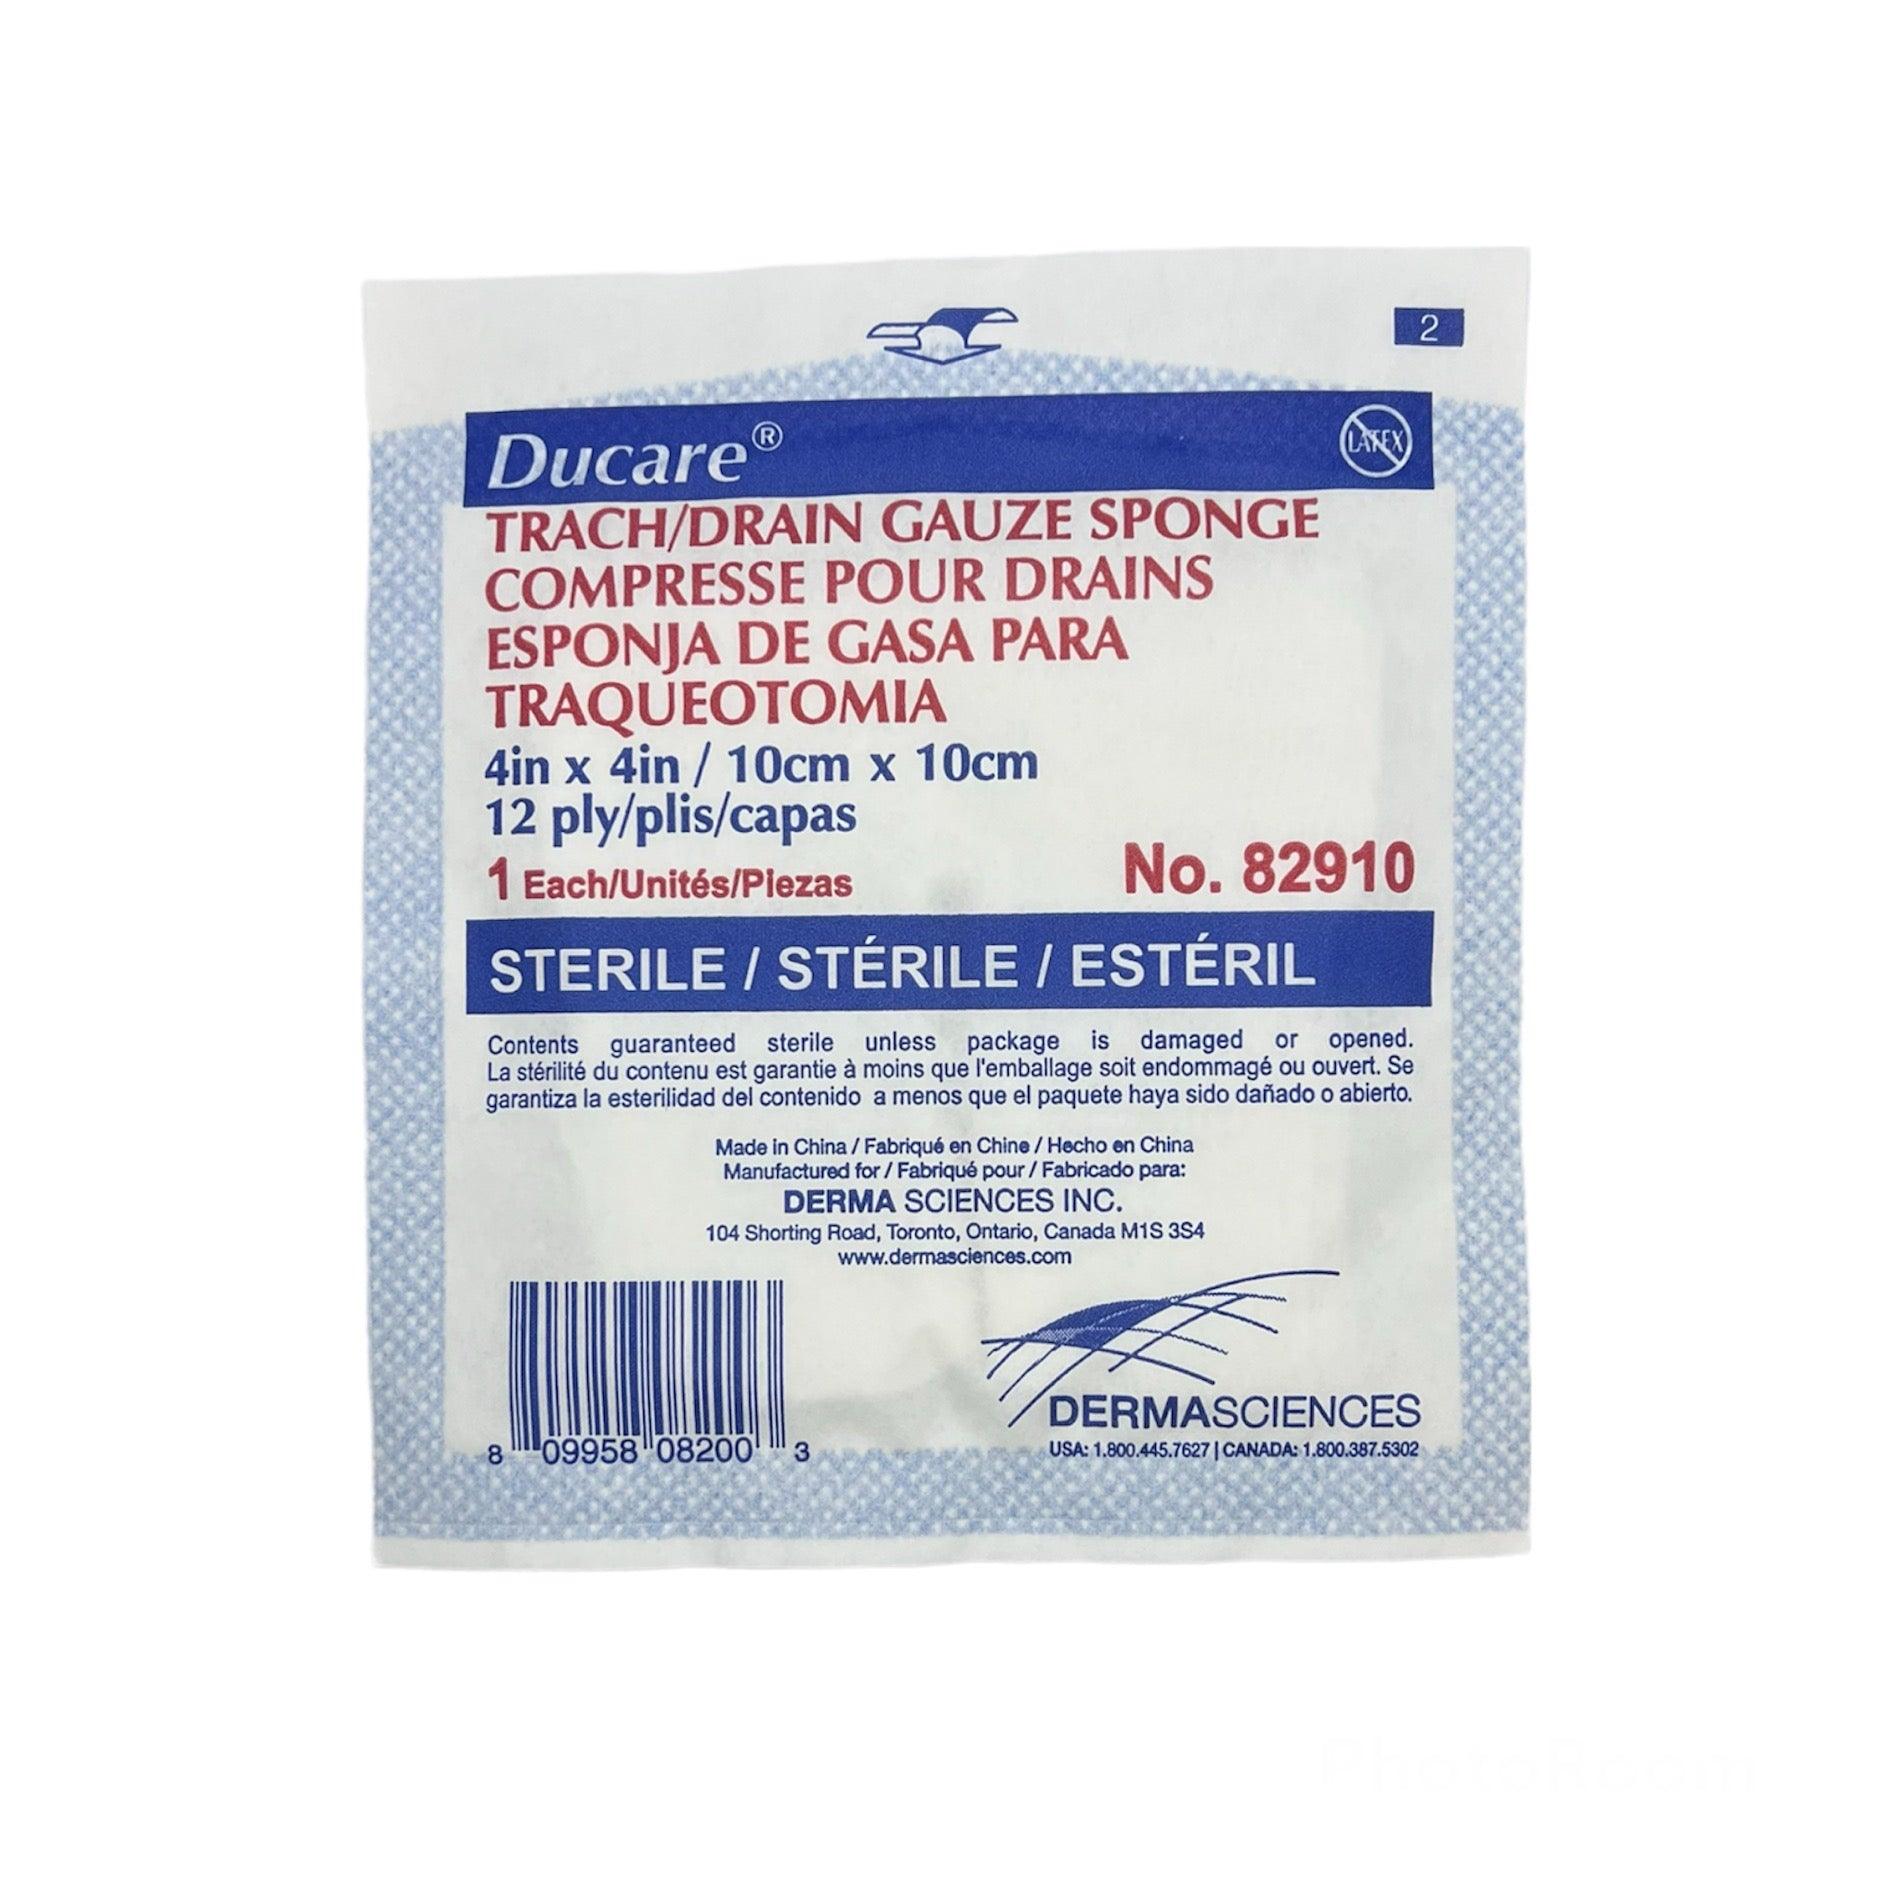 Derma Sciences I.V. and Tracheostomy Dressings 12-PLY- Ducare